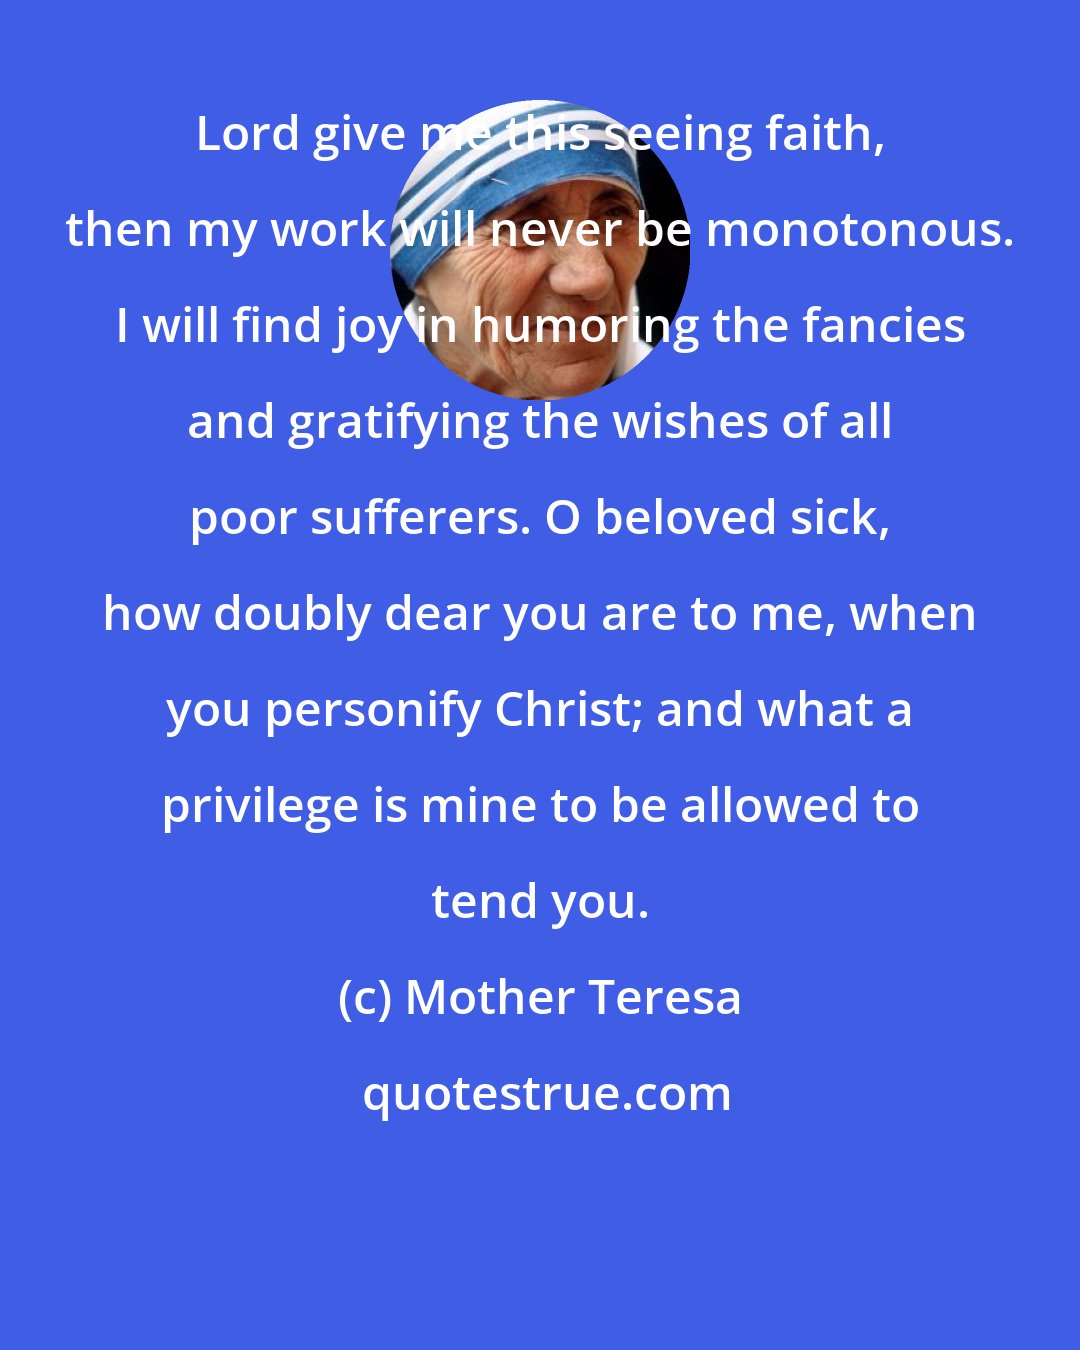 Mother Teresa: Lord give me this seeing faith, then my work will never be monotonous. I will find joy in humoring the fancies and gratifying the wishes of all poor sufferers. O beloved sick, how doubly dear you are to me, when you personify Christ; and what a privilege is mine to be allowed to tend you.